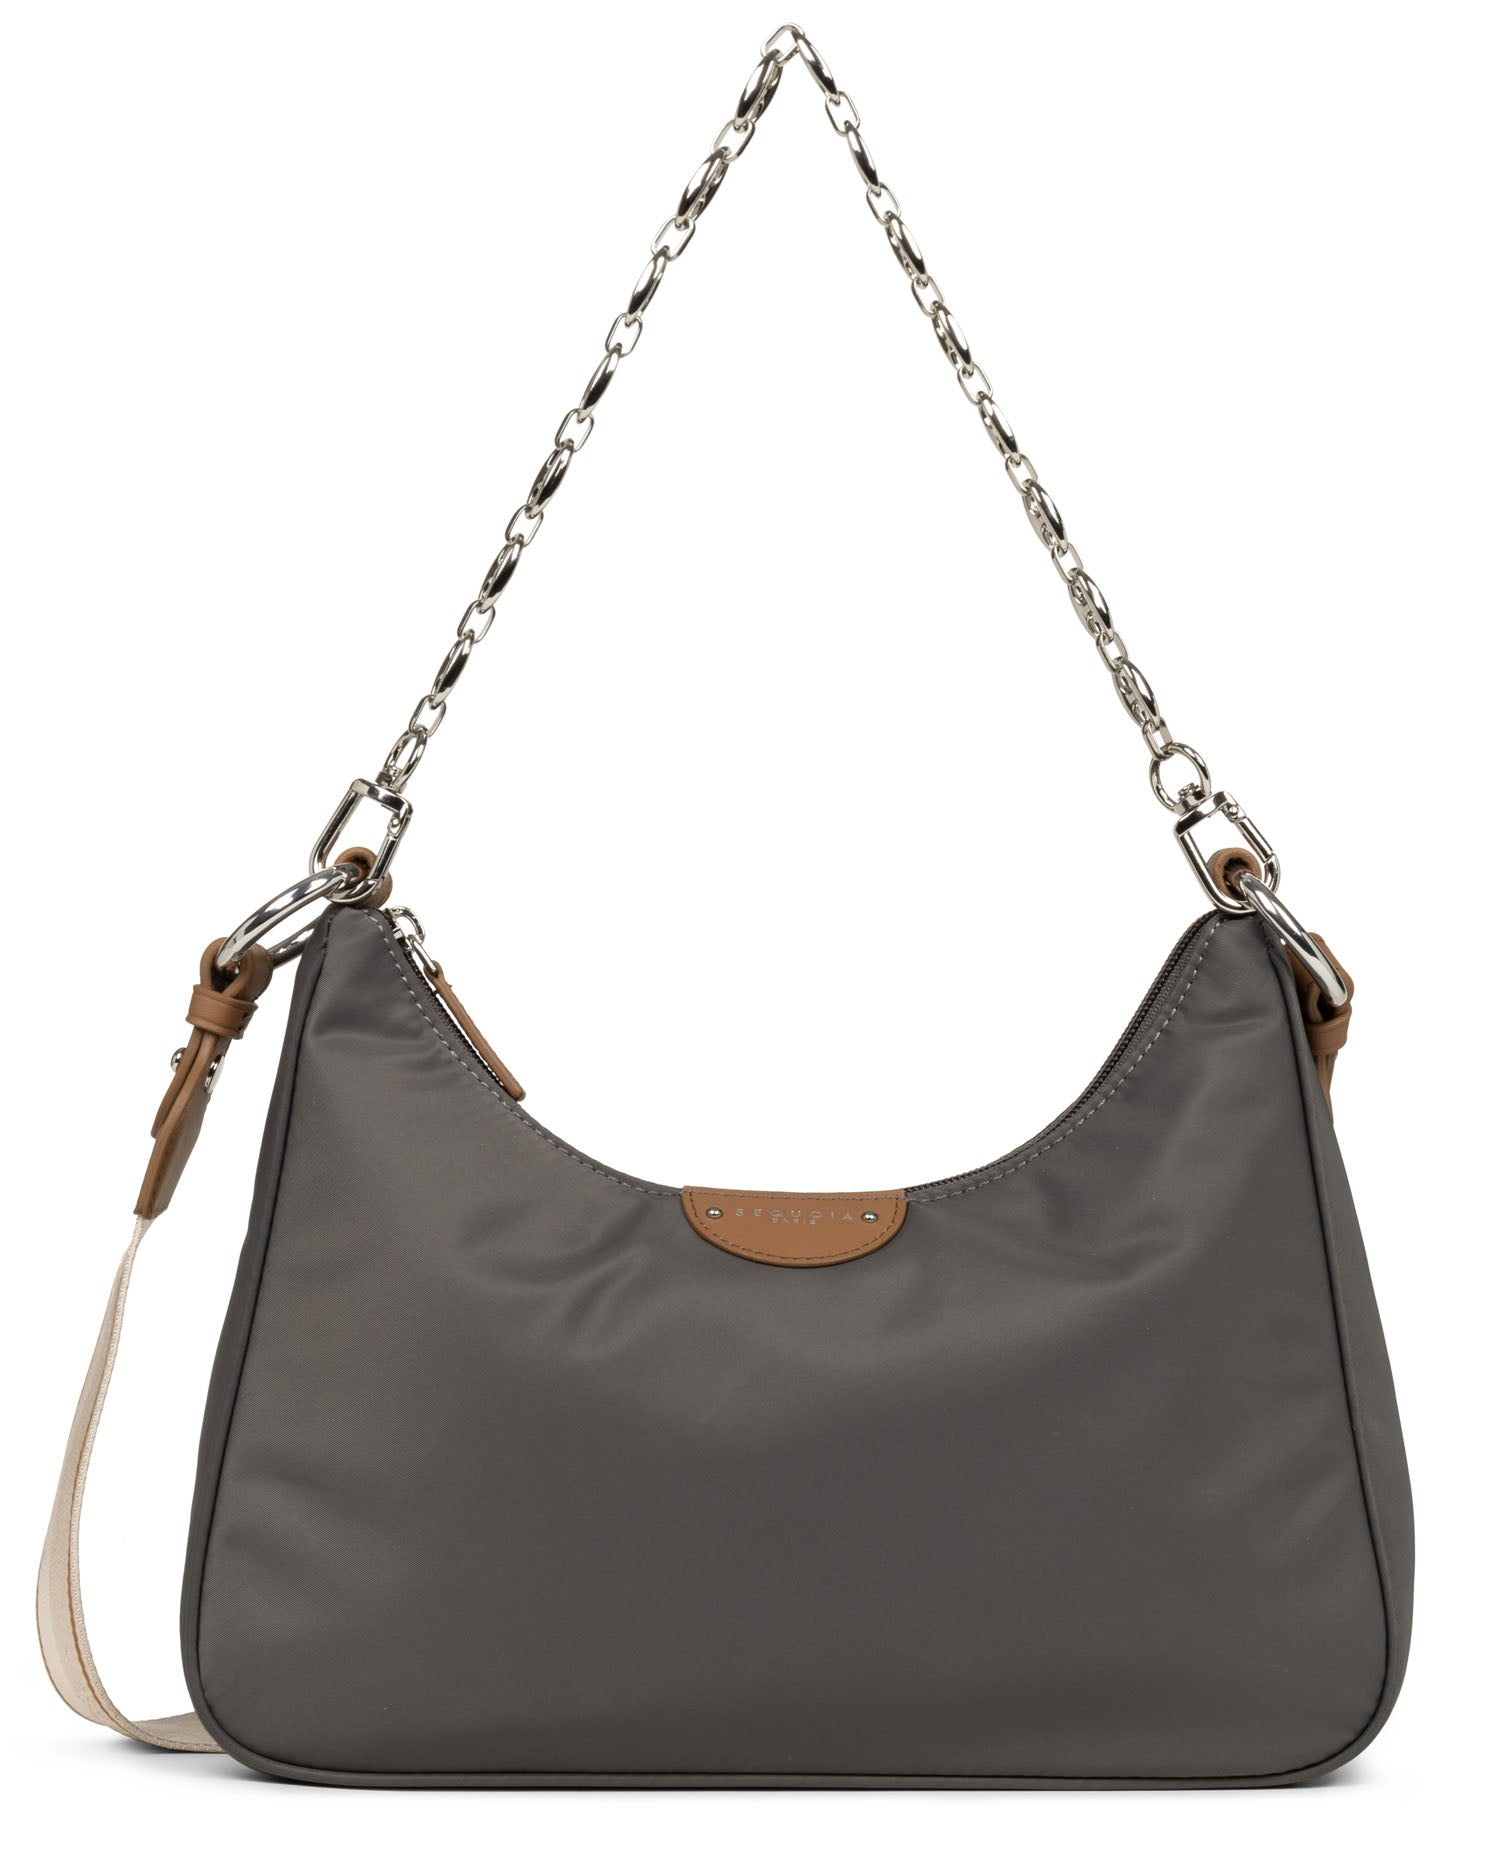 Bag Review : Longchamp Le Pliage Tote in Gunmetal + Links On How